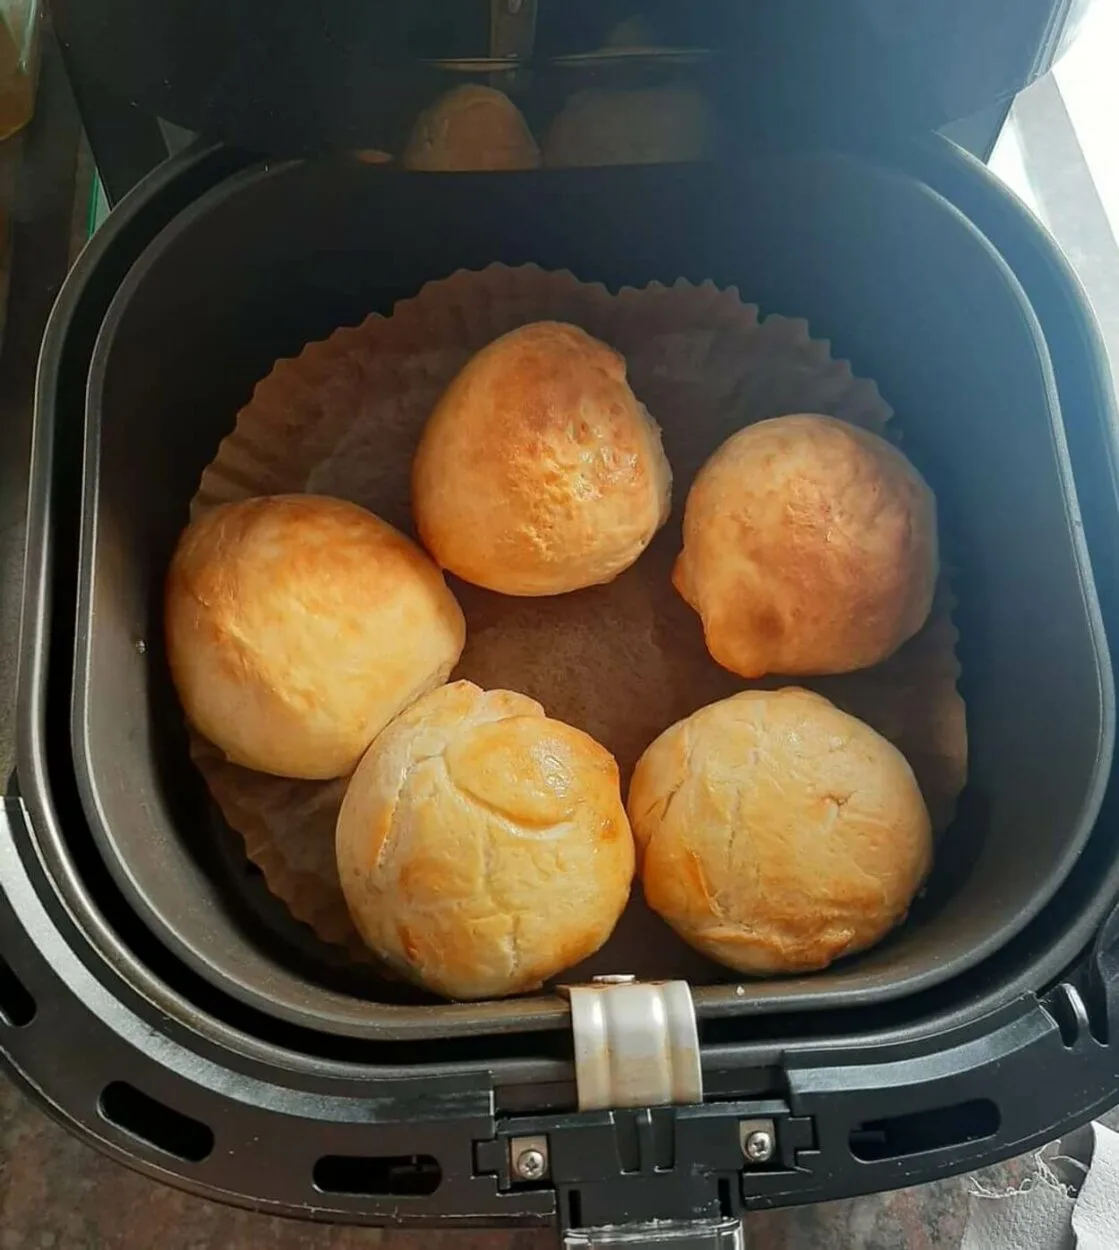 An image of an Air fryer basket with air fryer food in it.